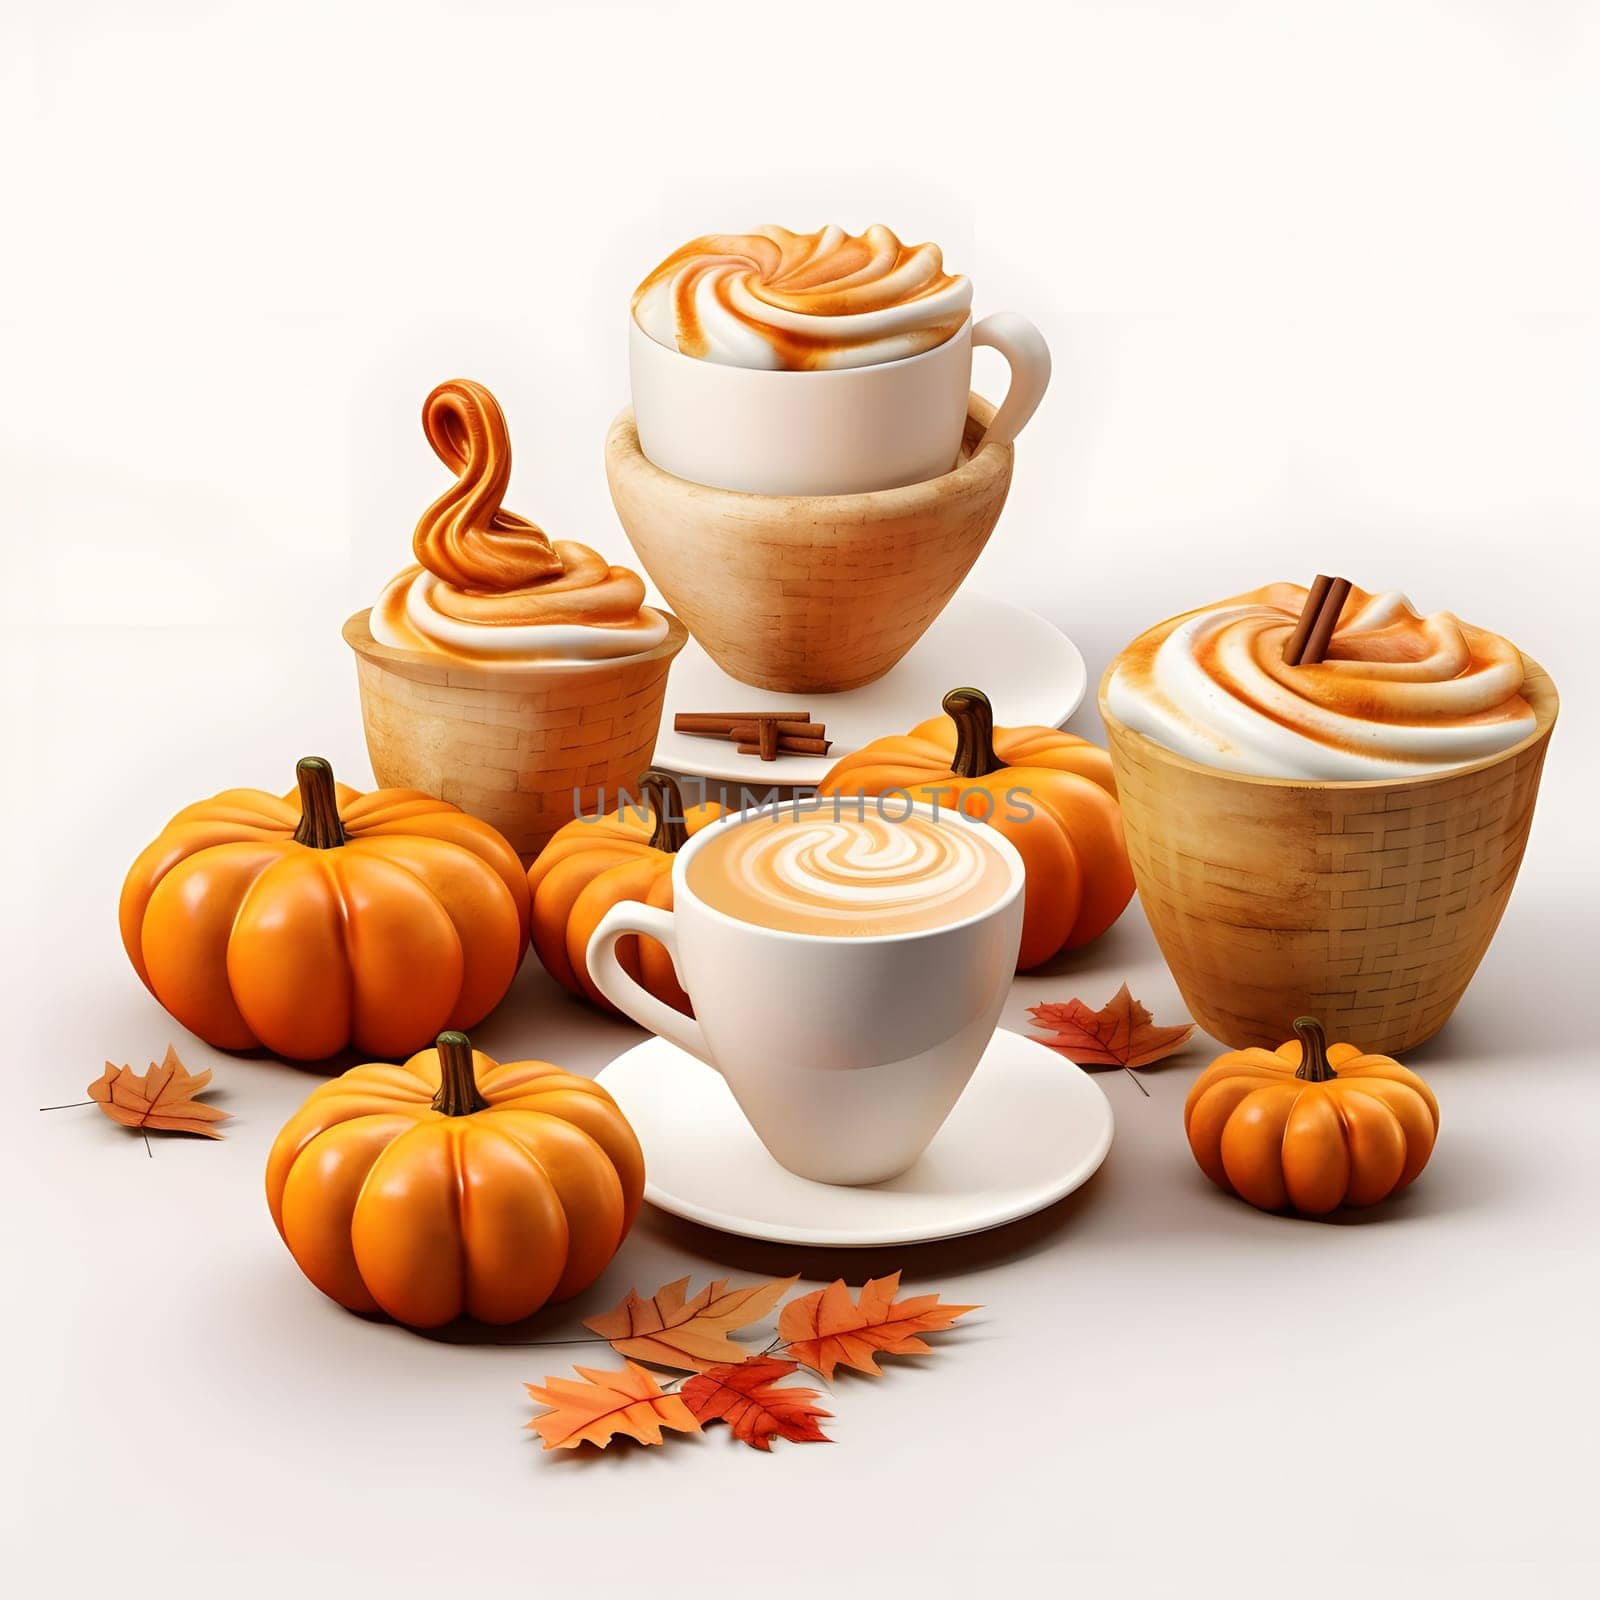 Small pumpkins and coffees in glasses. Pumpkin as a dish of thanksgiving for the harvest, picture on a white isolated background. An atmosphere of joy and celebration.